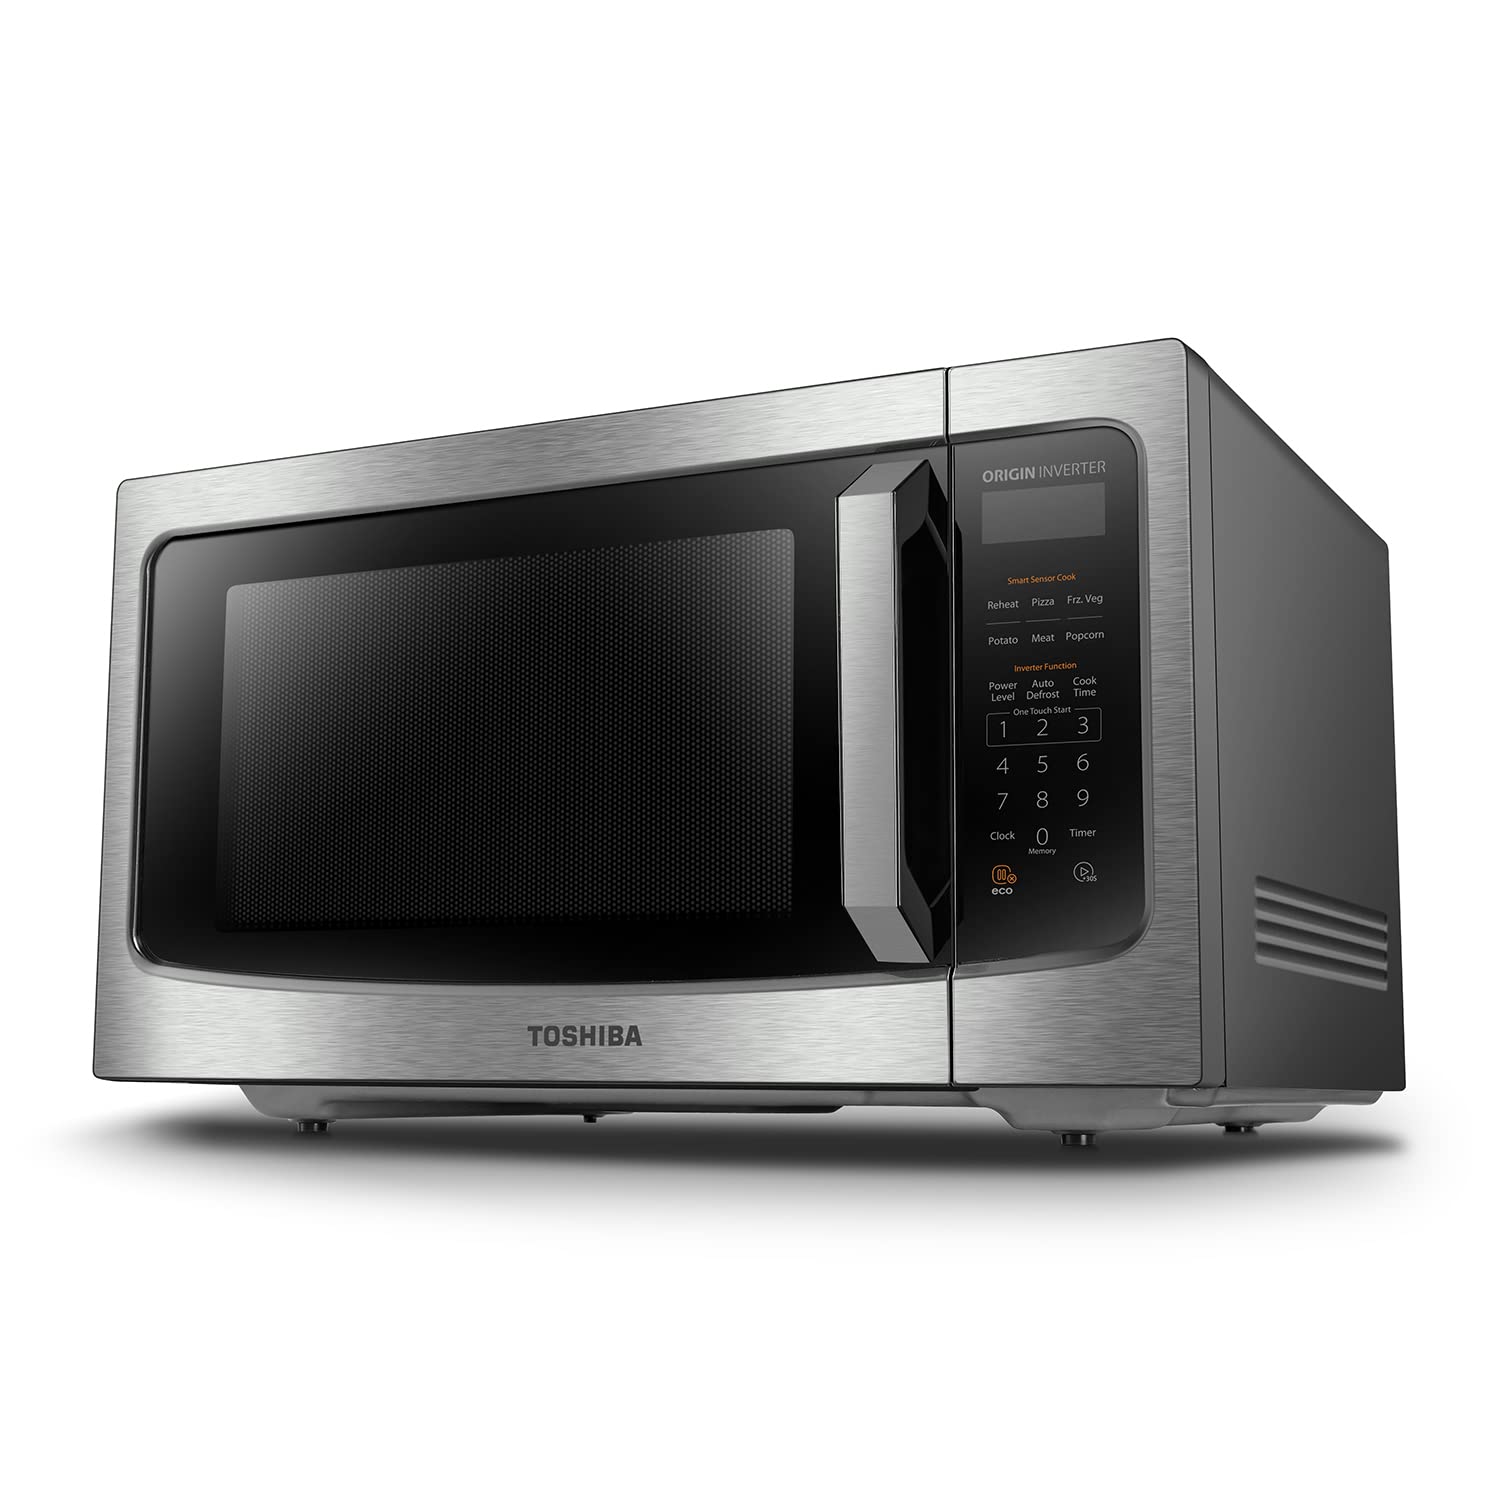 Toshiba Ml-Em45Pit(Ss) Countertop Microwave Oven With Inverter Technology, Kitchen Essentials, Smart Sensor, Auto Defrost, 1.6 C